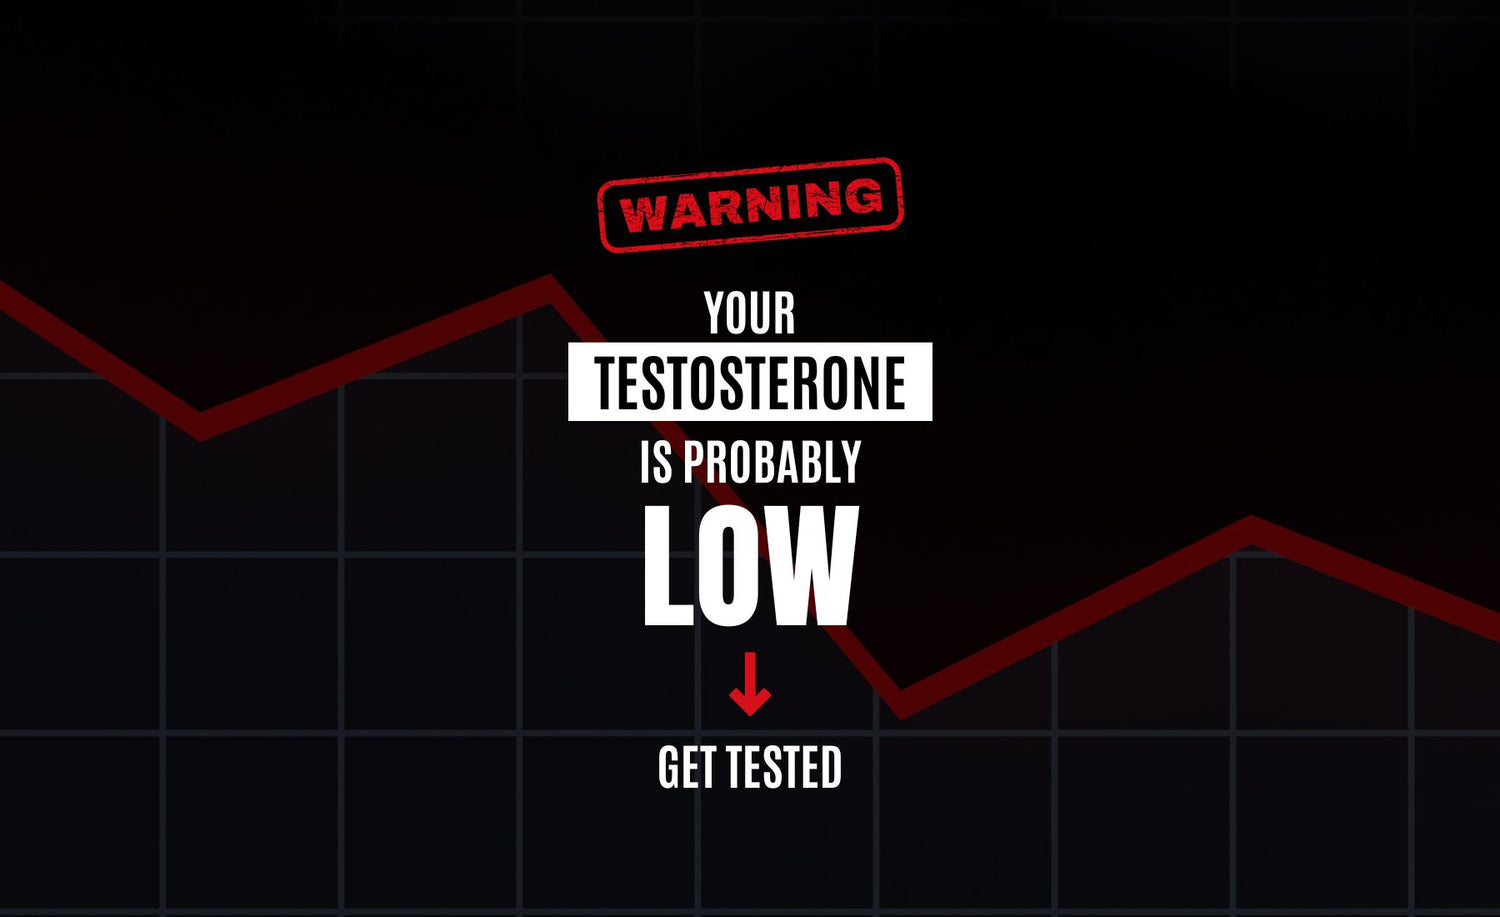 Get Your Test Tested!